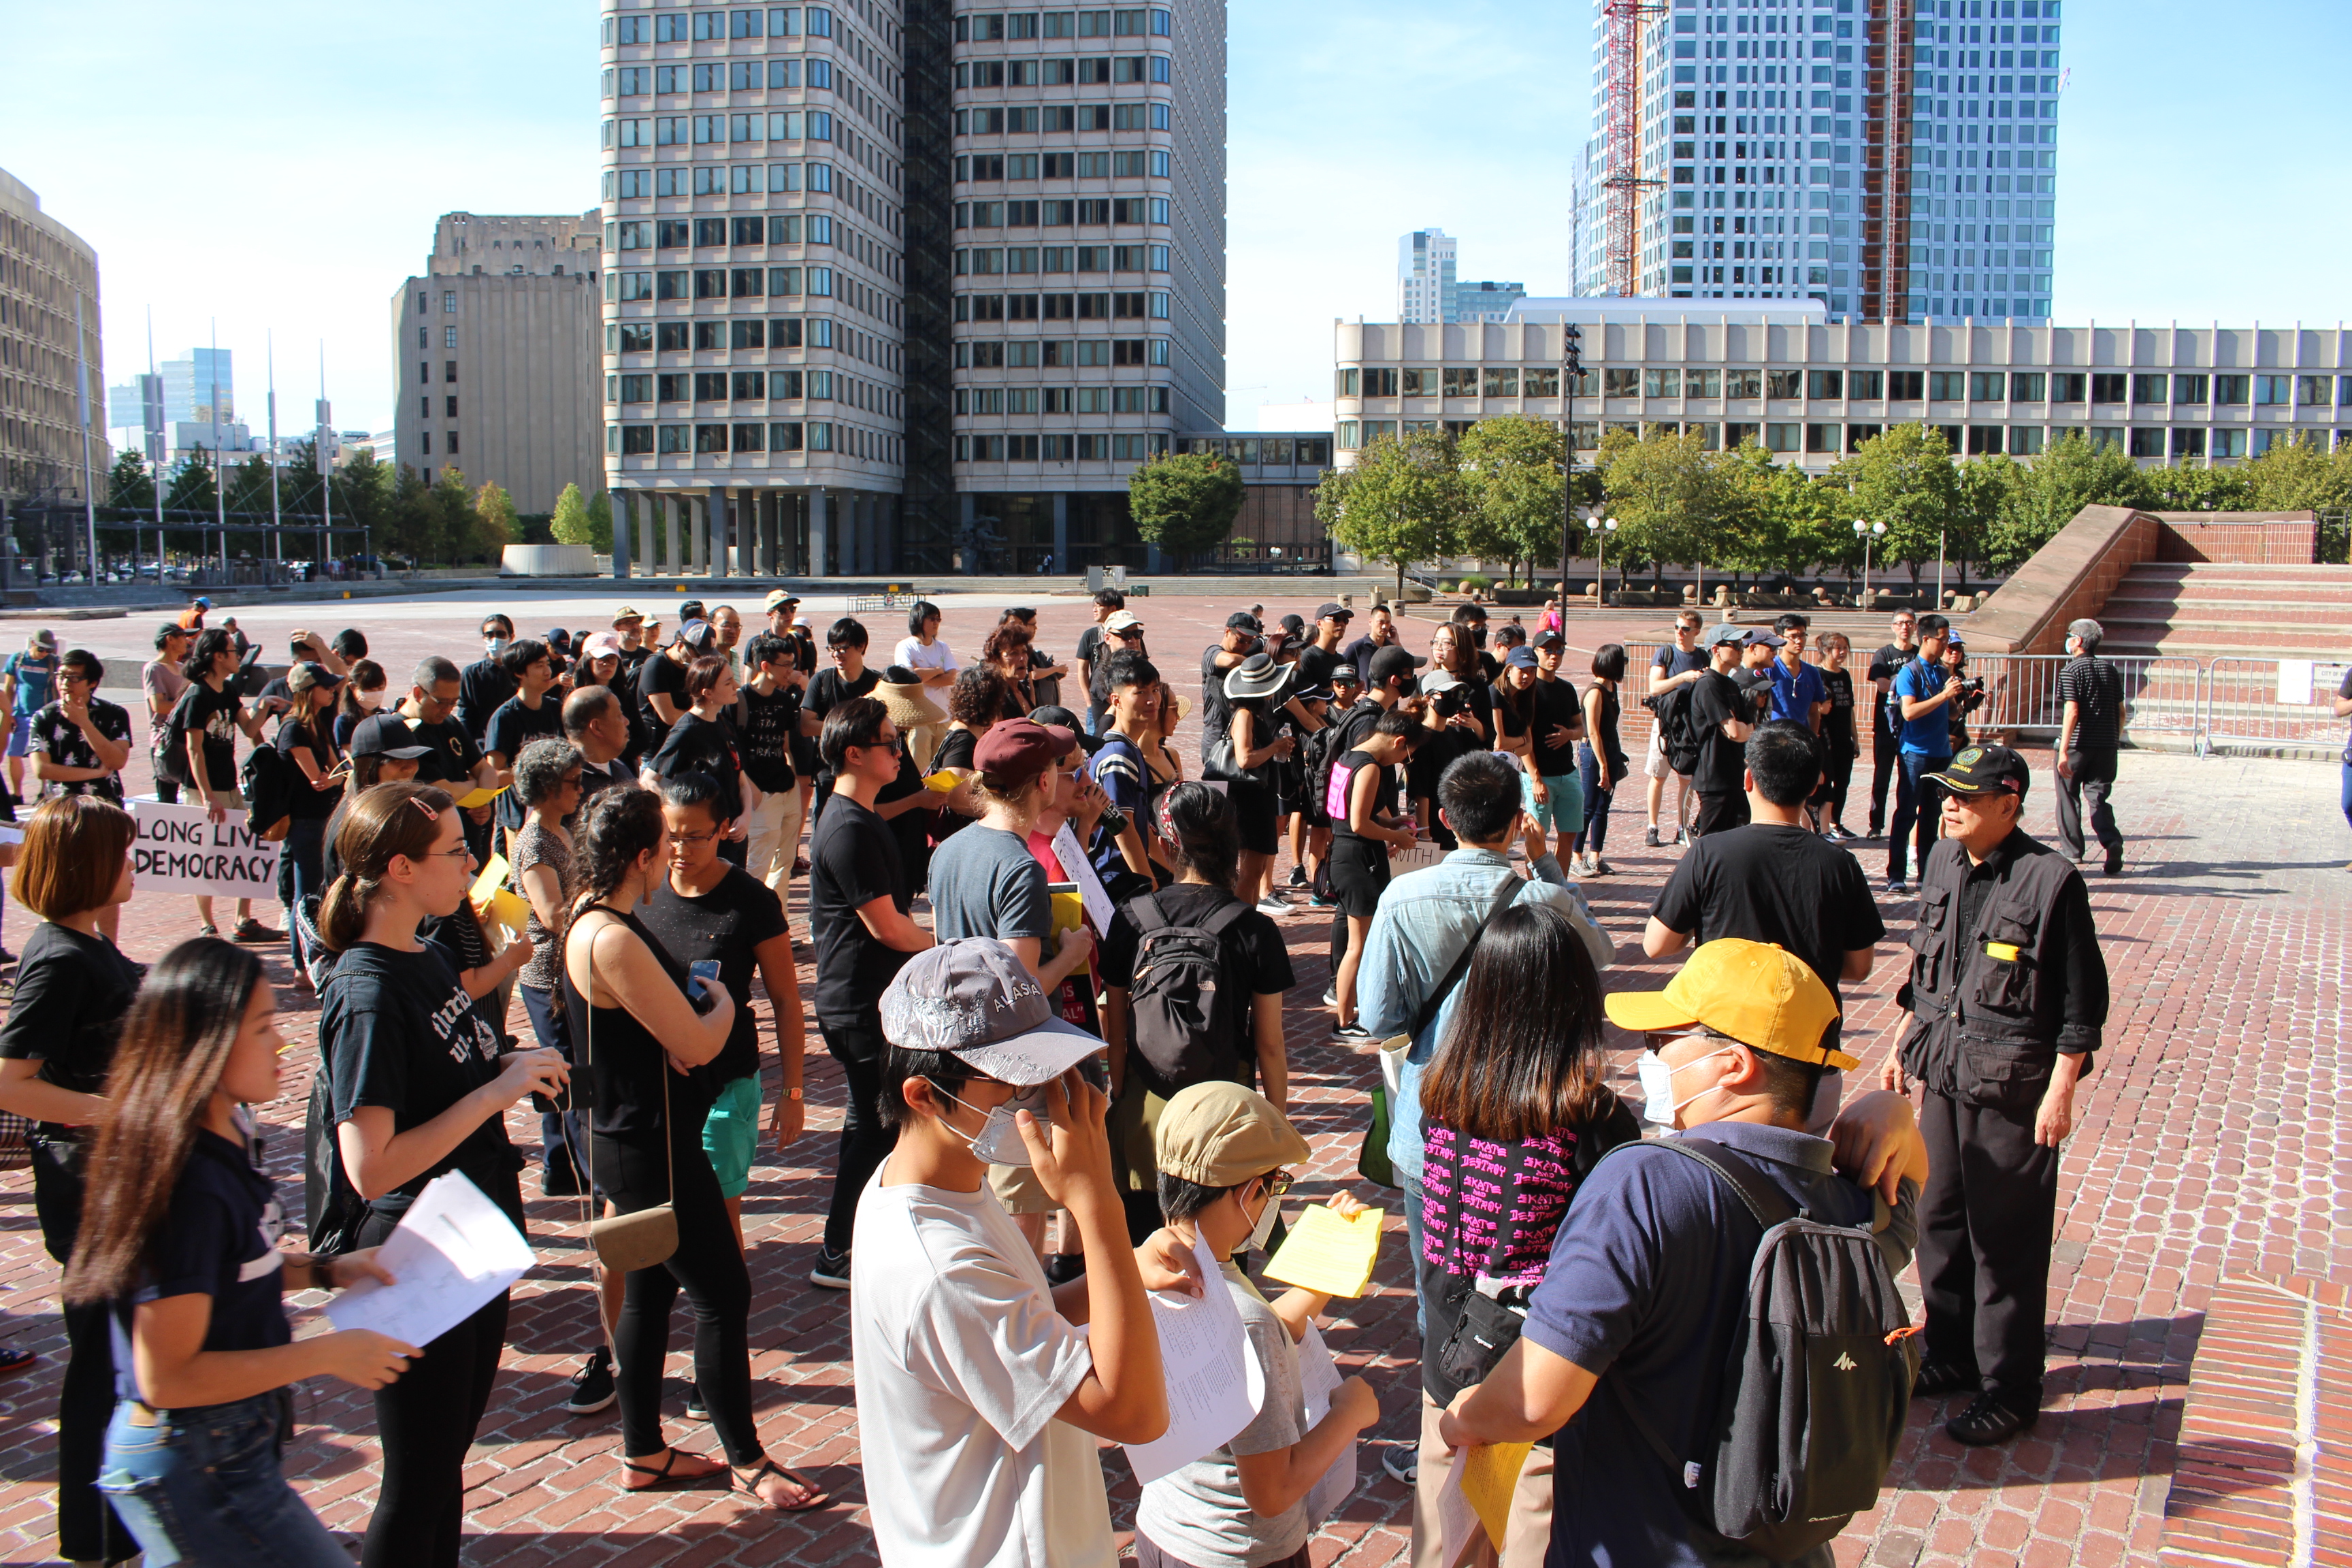 Crowds gathered in City Hall Plaza on Sept. 22 in solidarity with protestors in Hong Kong. Photo by Lex Weaver.